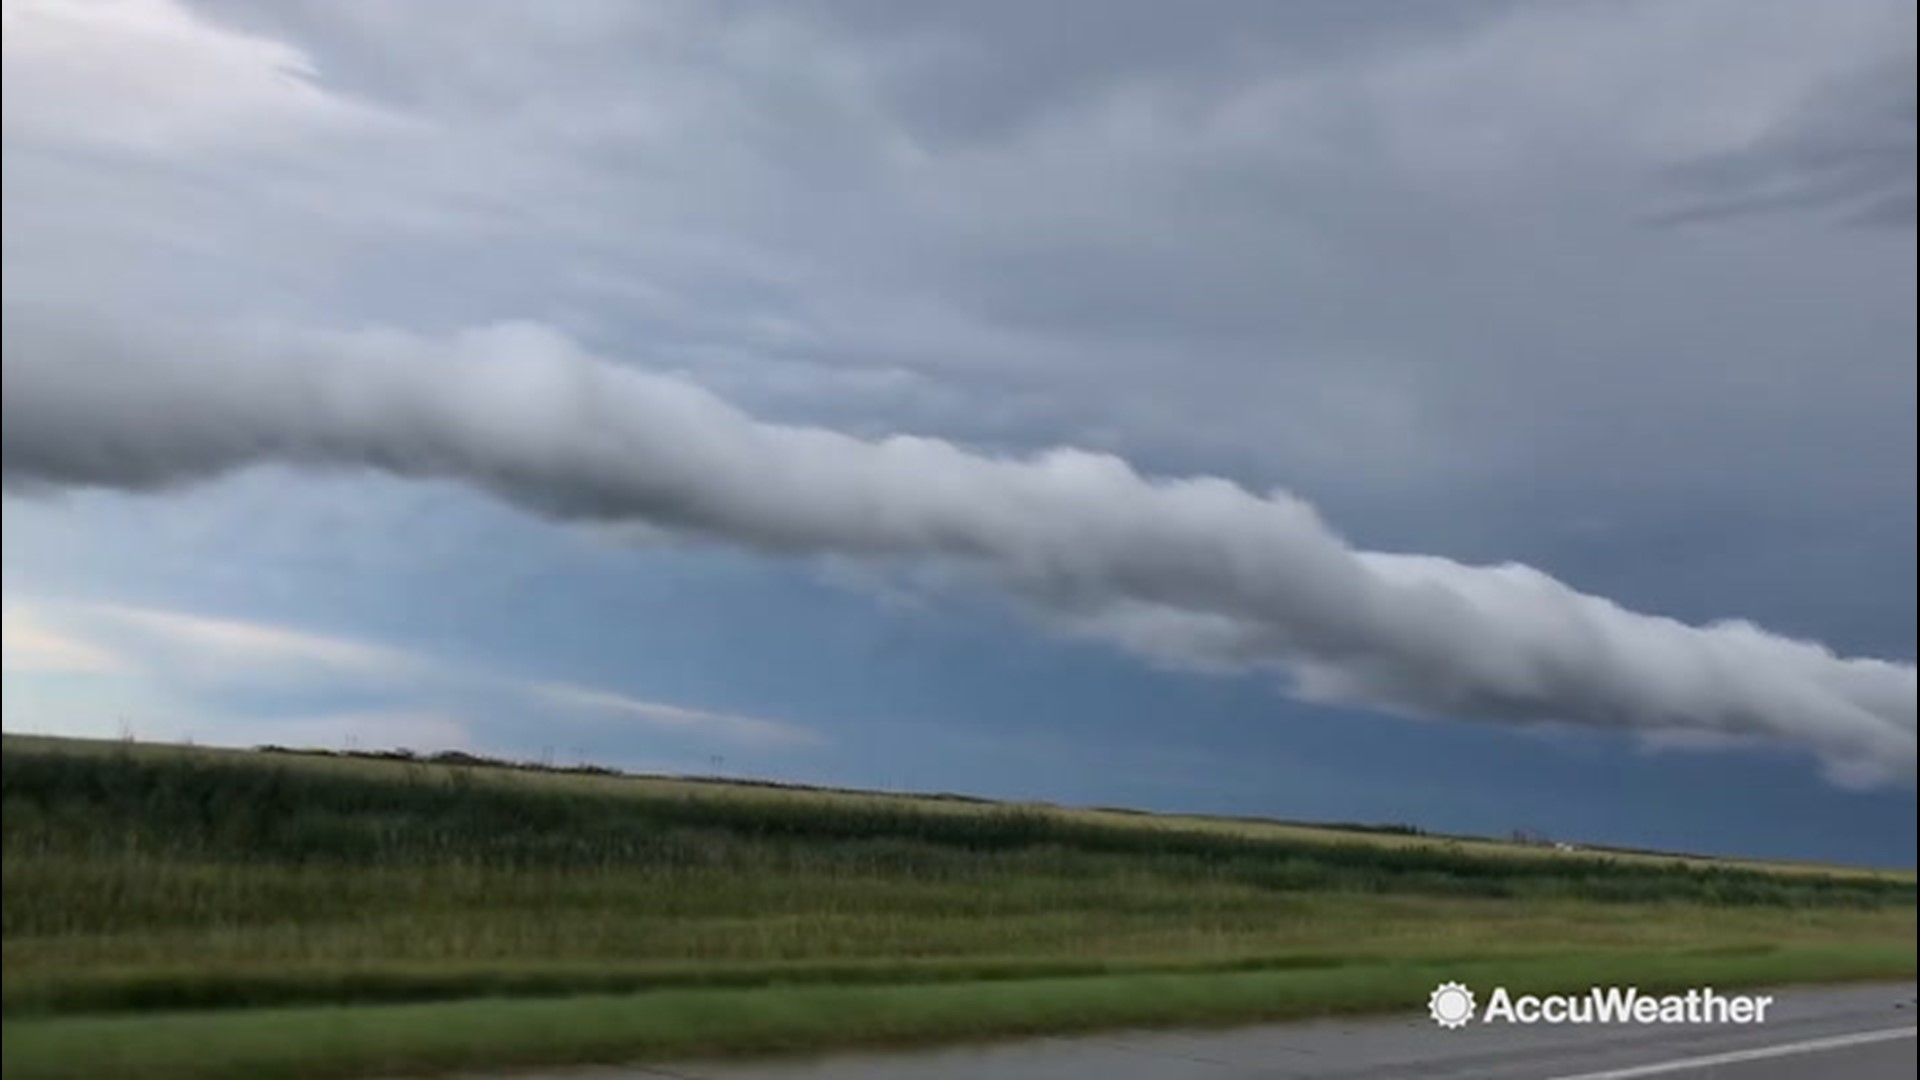 Storm chaser Reed Timmer came across a gorgeous rope cloud formation while driving in Burlington, Colorado, on Aug. 13.